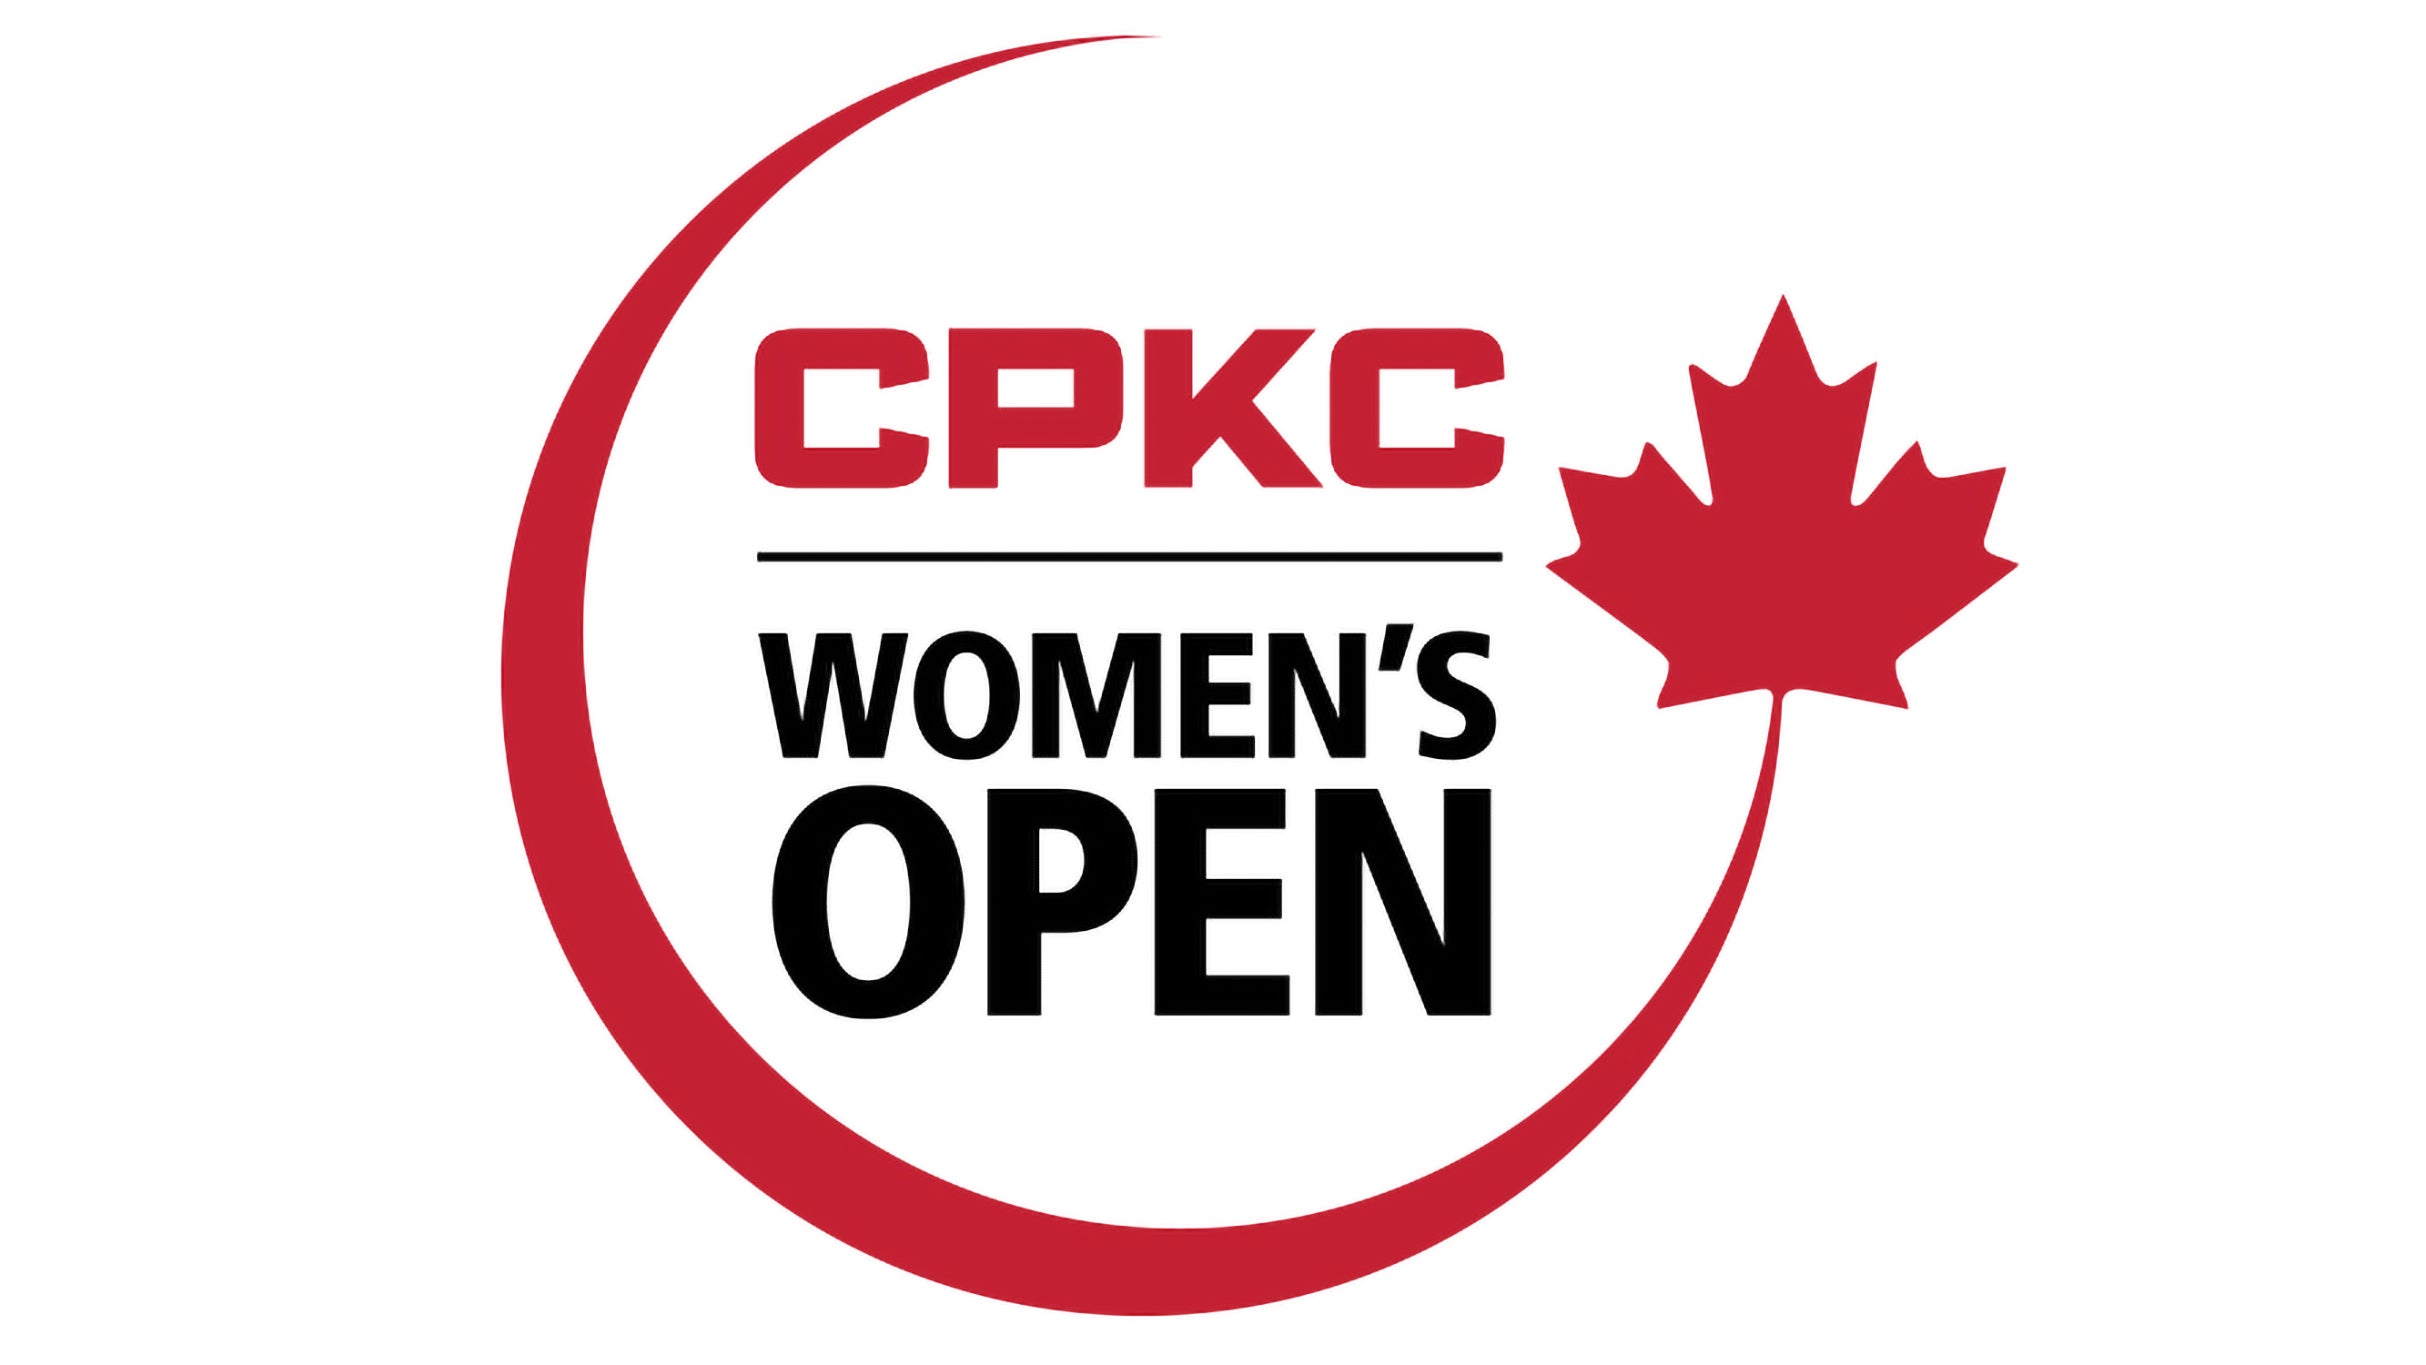 CPKC Women's Open Friday Ticket in Calgary promo photo for Golf and Tacos presale offer code